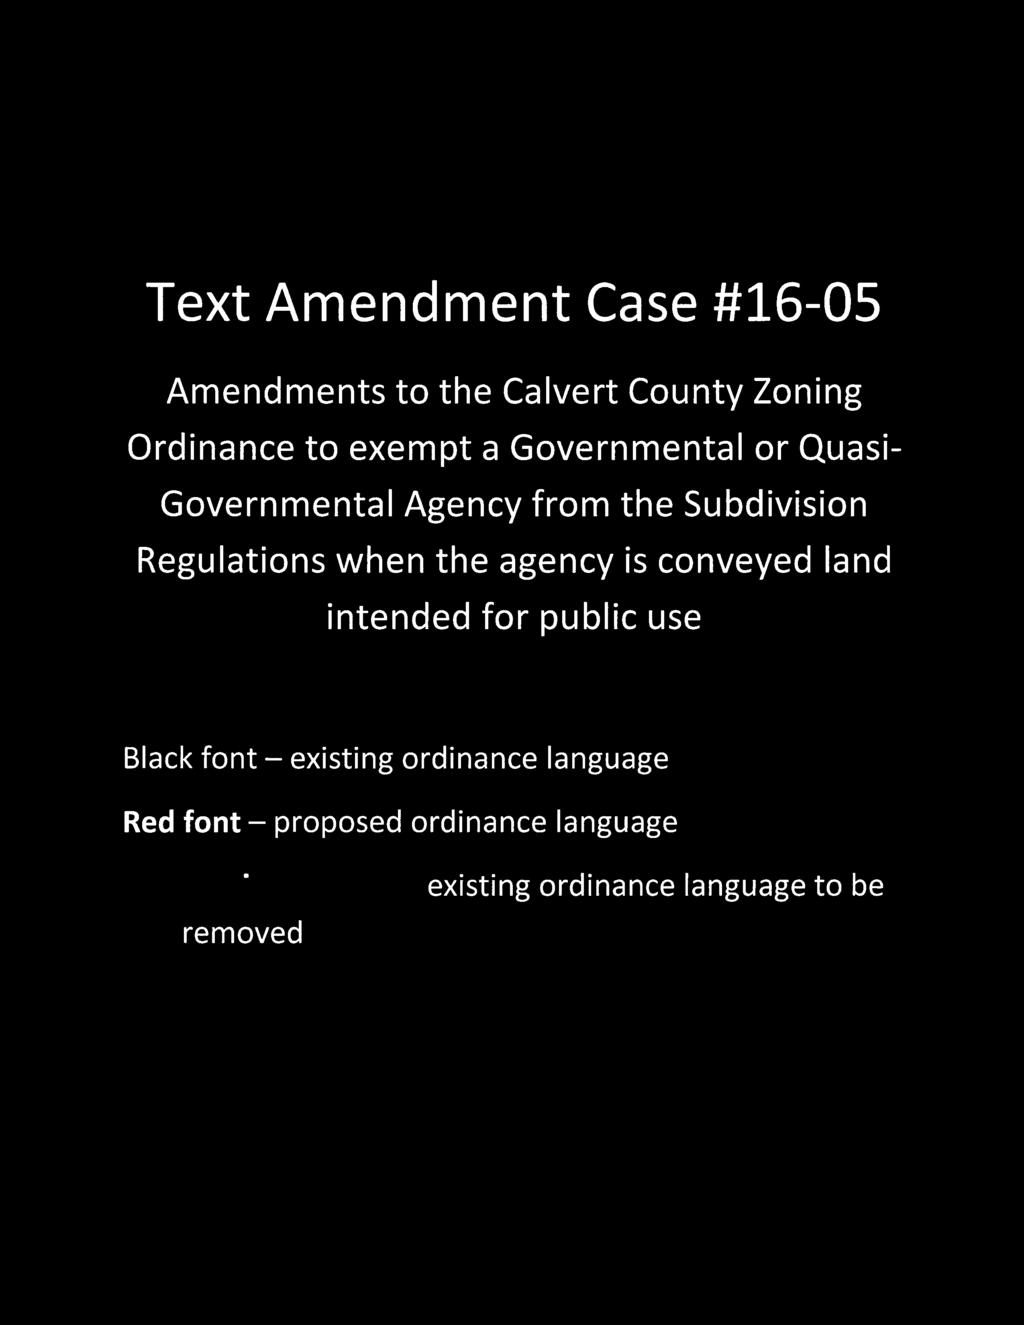 Text Amendment Case #16-05 Amendments to the Calvert County Zoning Ordinance to exempt a Governmental or Quasi- Governmental Agency from the Subdivision Regulations when the agency